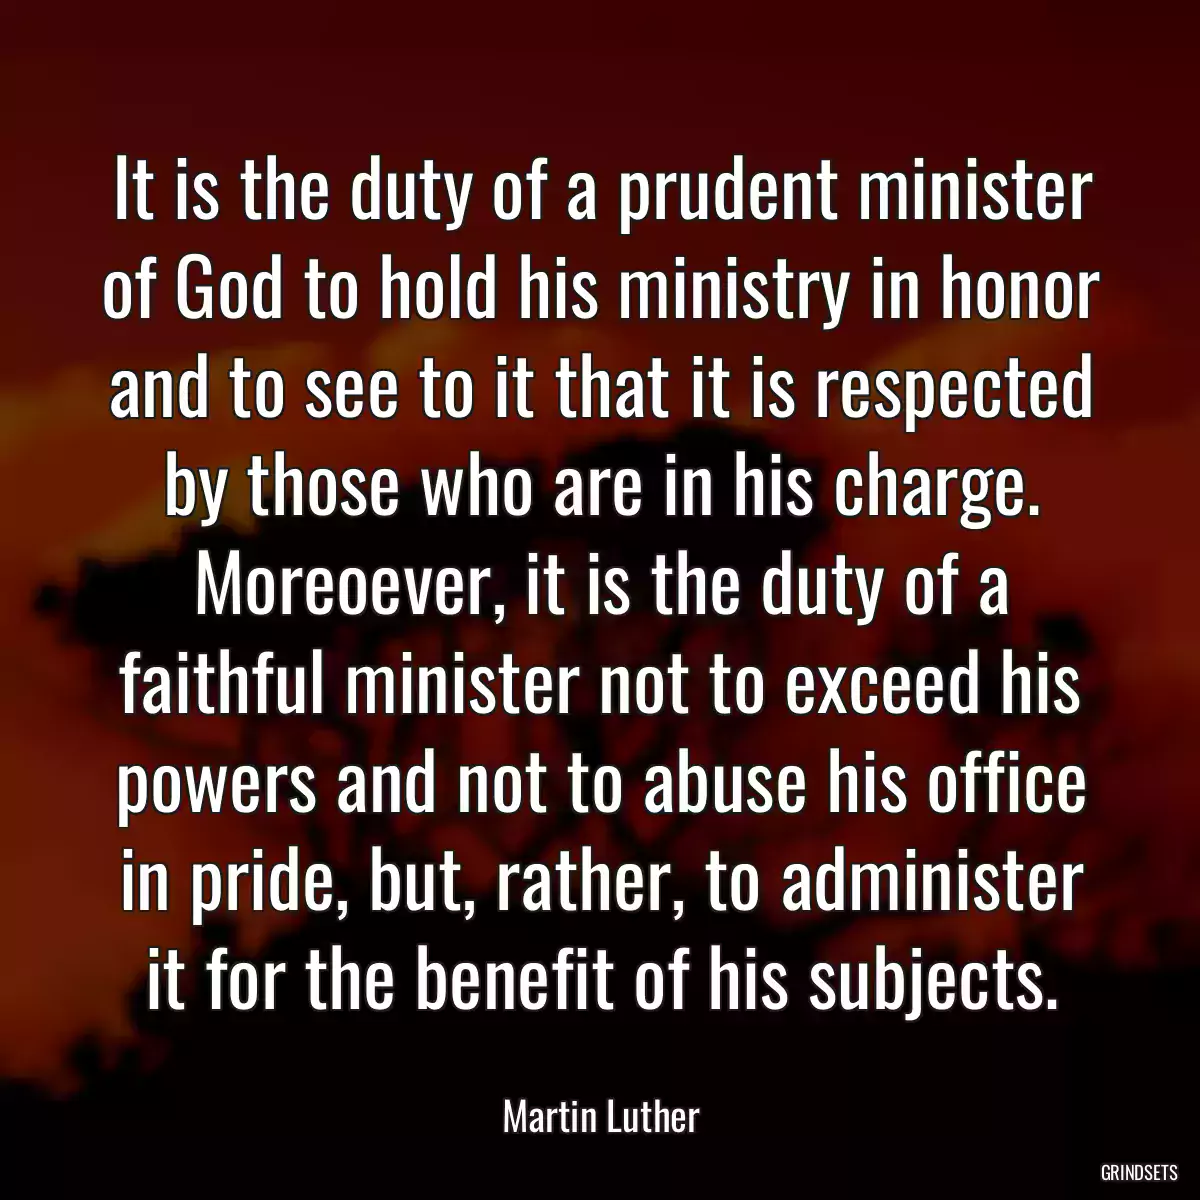 It is the duty of a prudent minister of God to hold his ministry in honor and to see to it that it is respected by those who are in his charge. Moreoever, it is the duty of a faithful minister not to exceed his powers and not to abuse his office in pride, but, rather, to administer it for the benefit of his subjects.